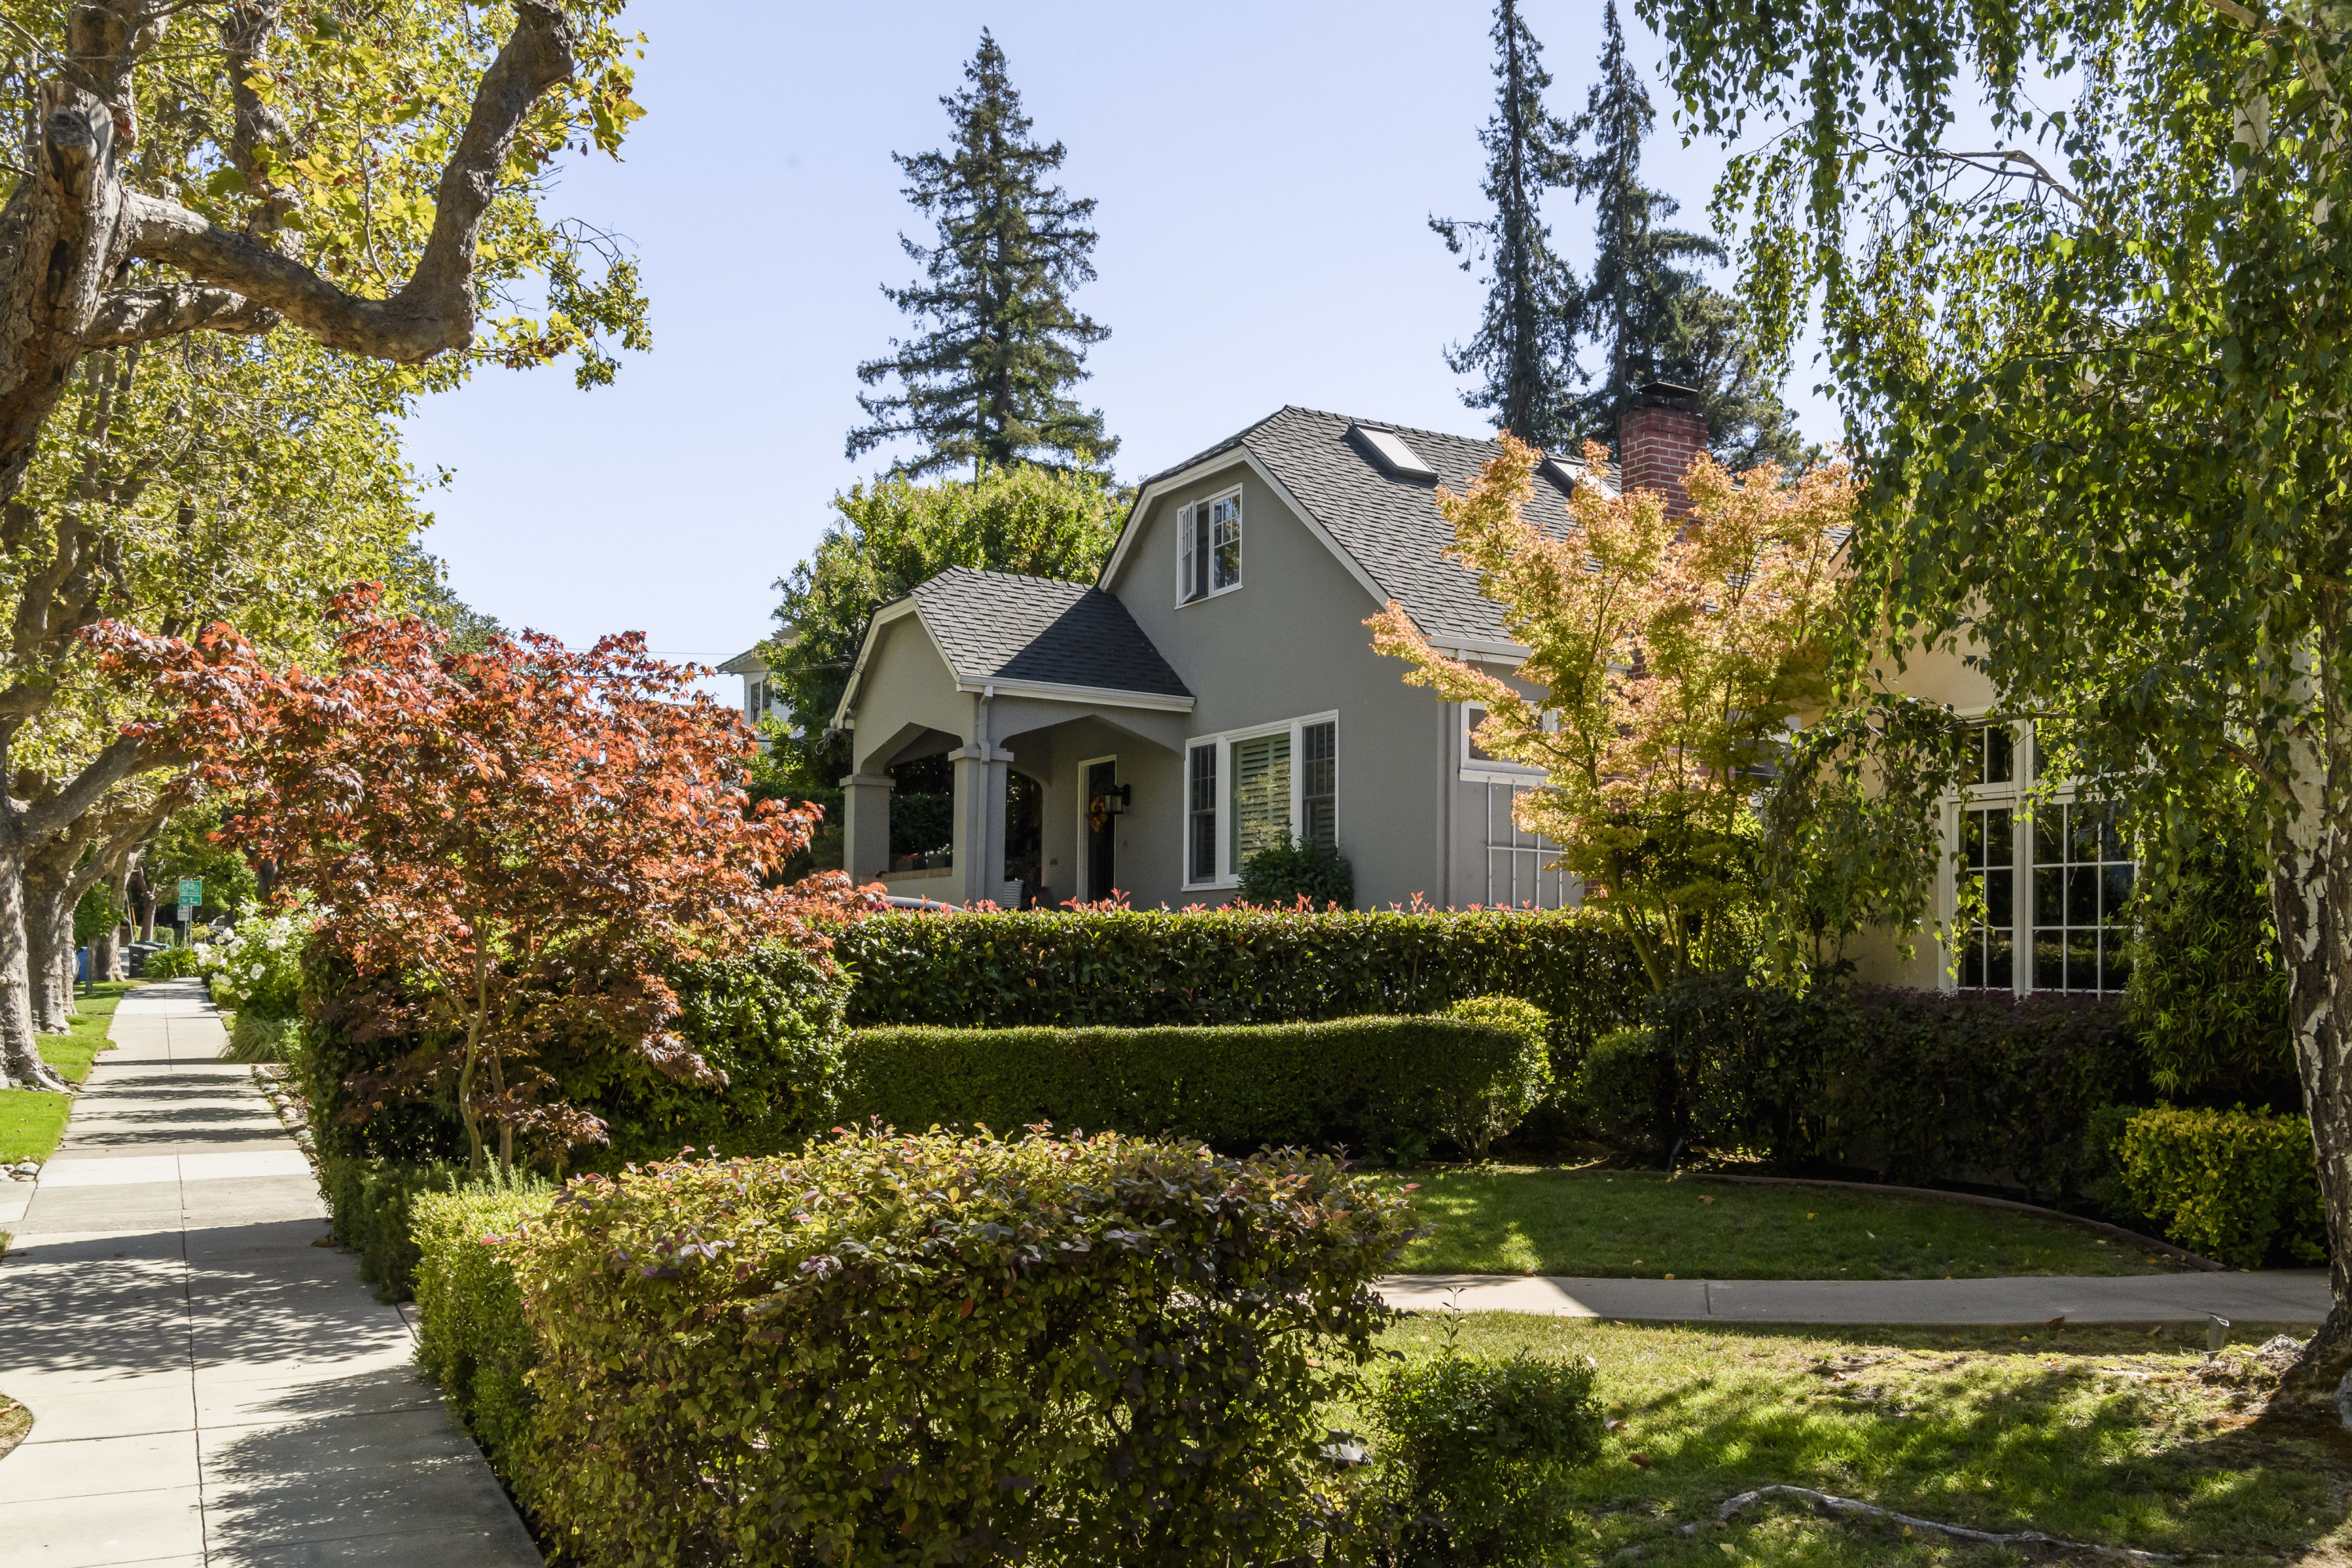 Burlingame Park home with tile roofing and grey exterior finish in Burlingame.